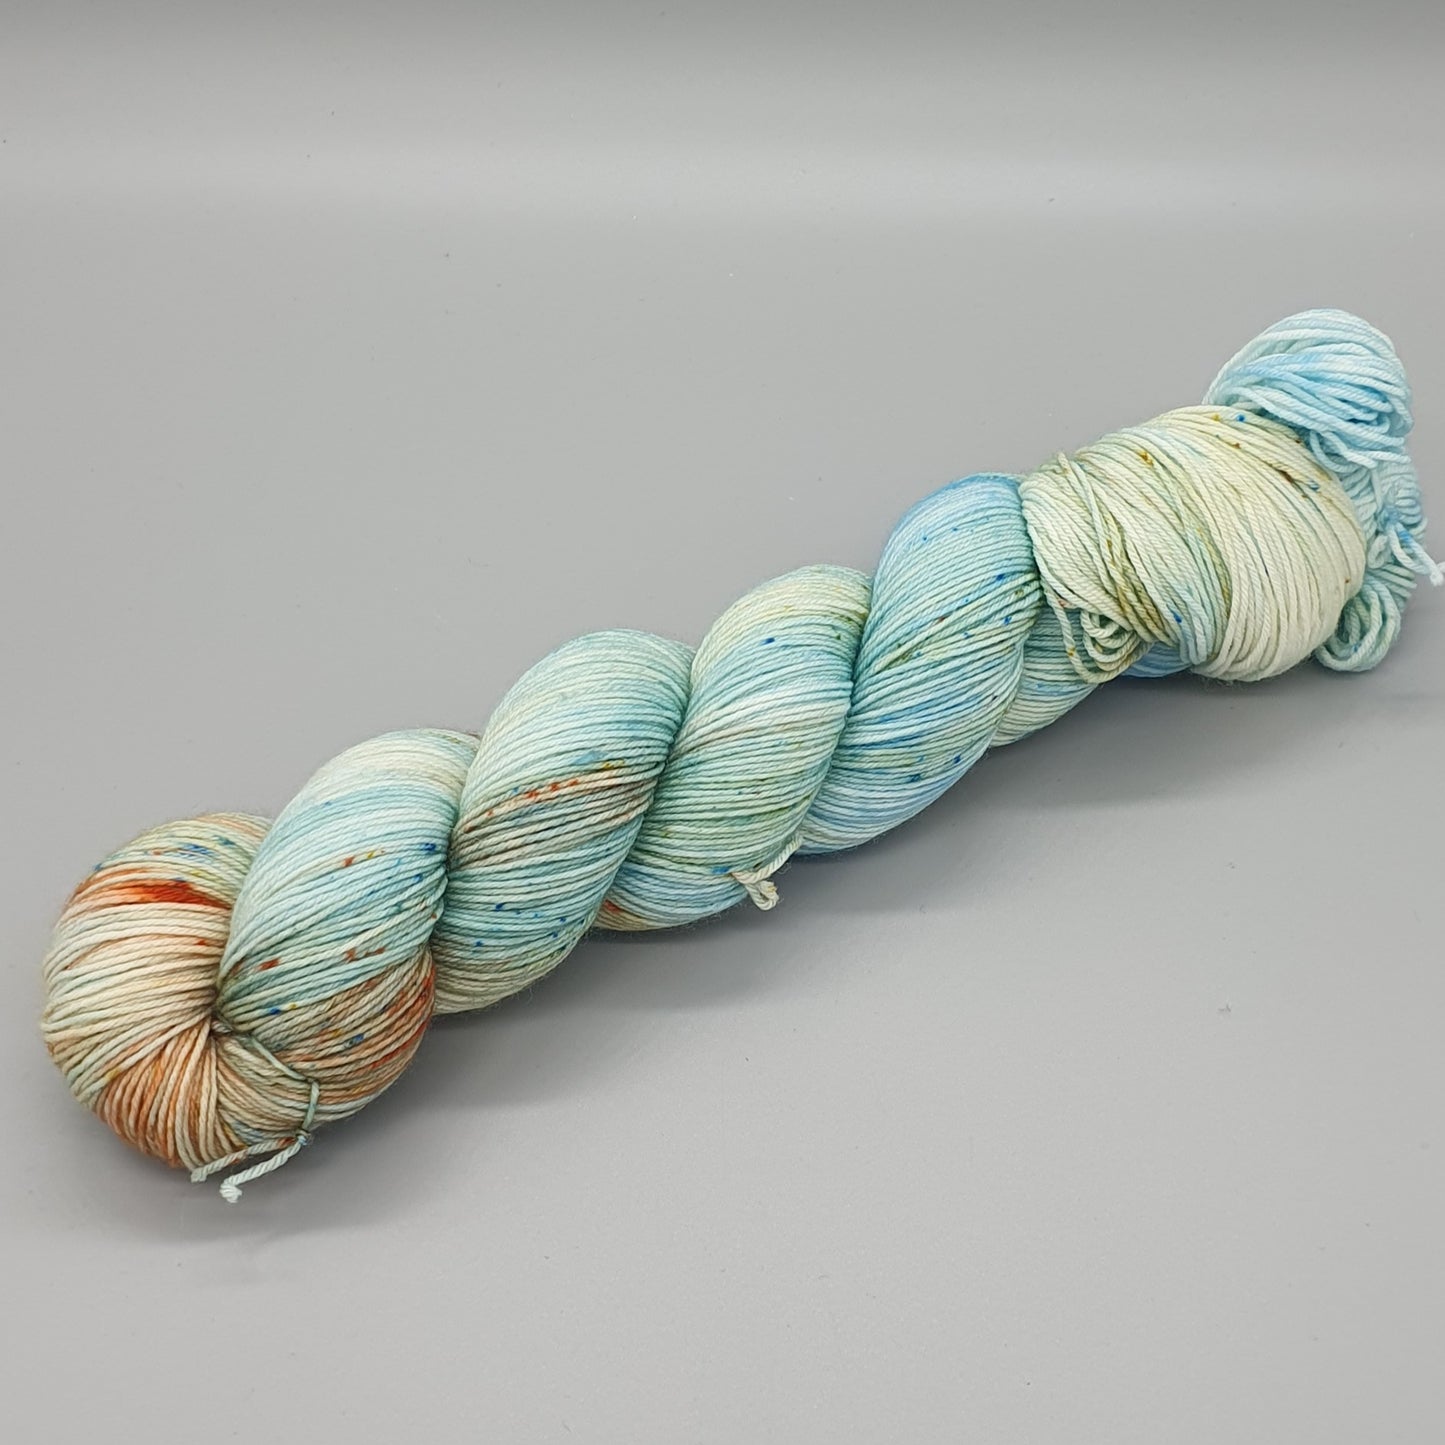 DYED TO ORDER - The Tale Of Peter Rabbit